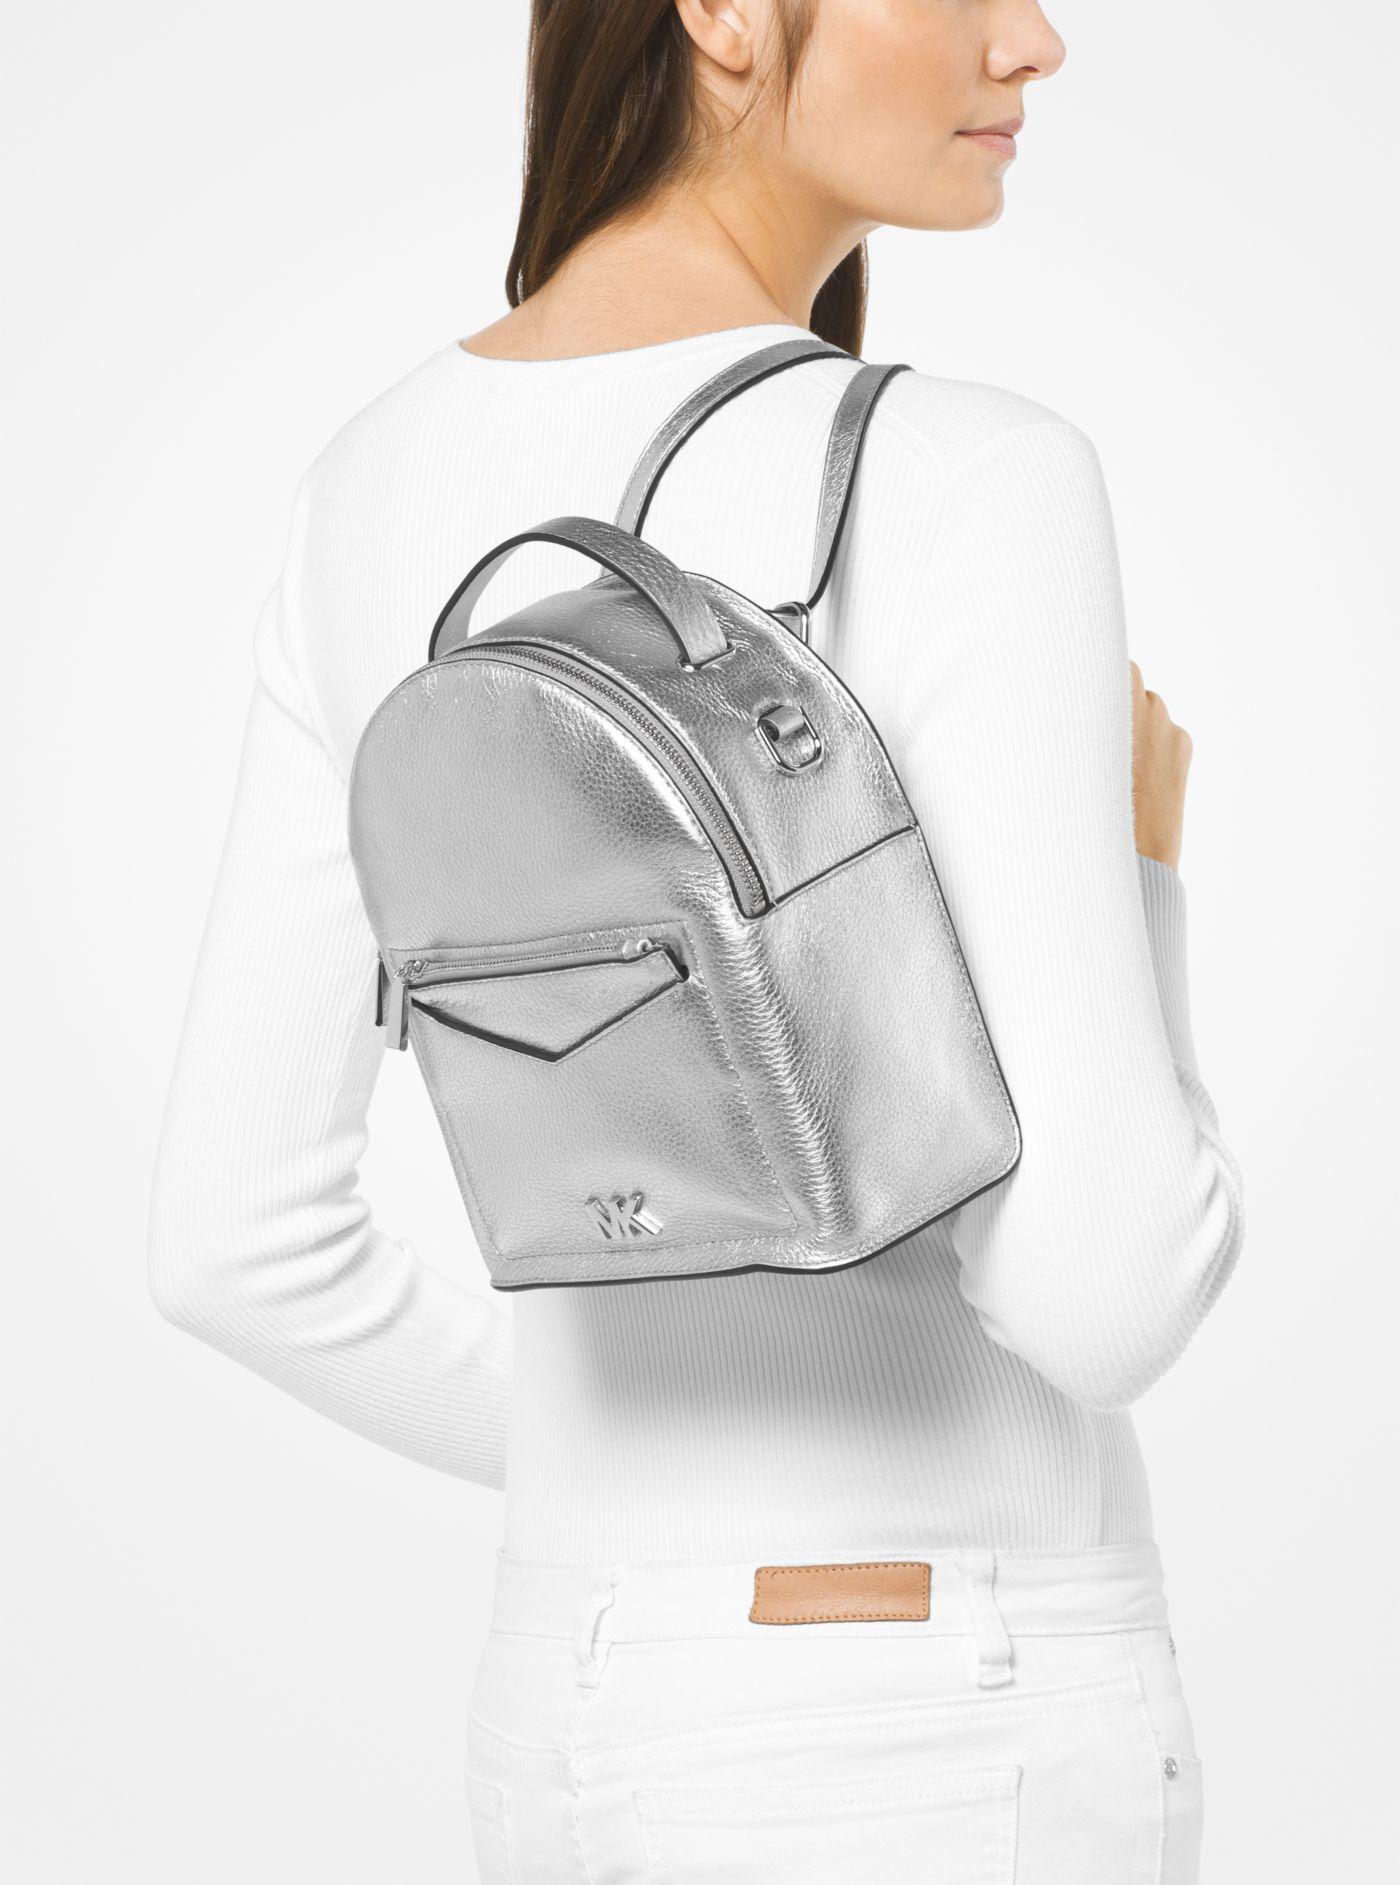 jessa small metallic pebbled leather convertible backpack